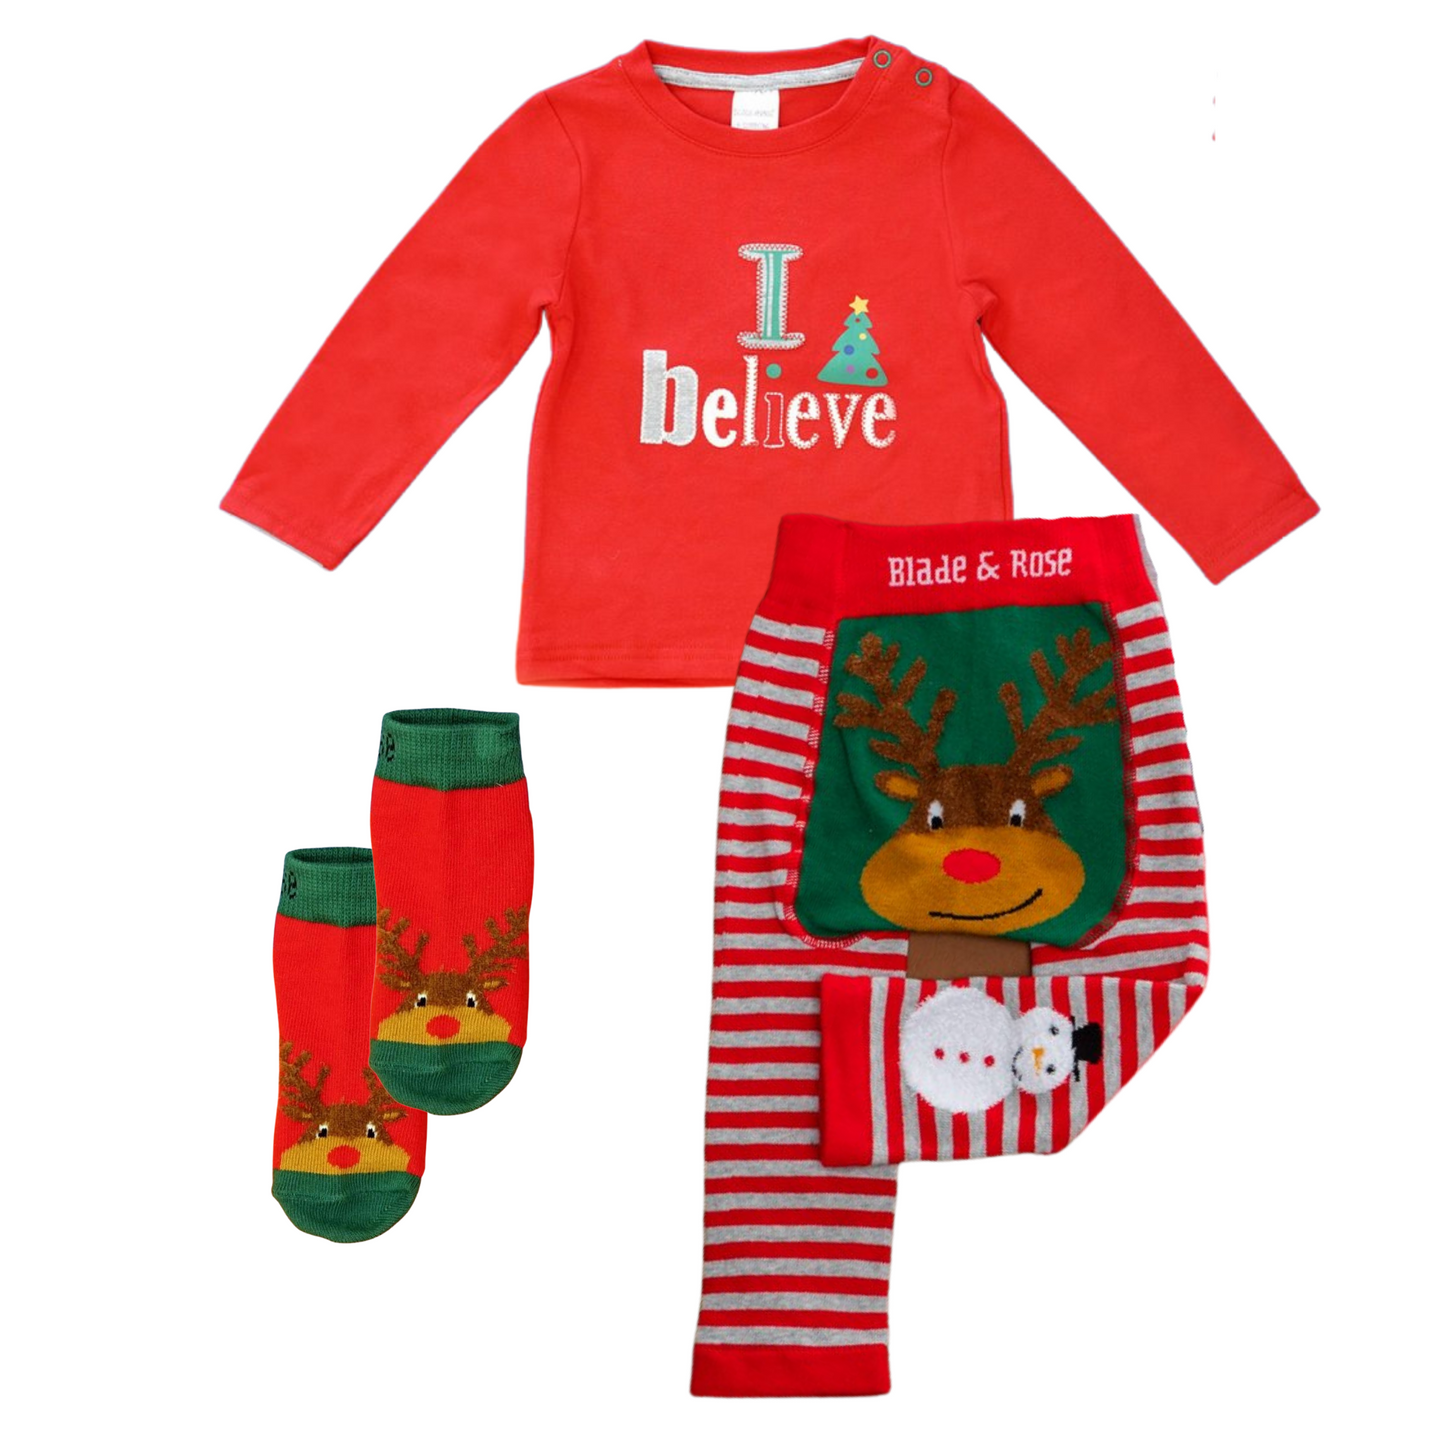 Blade & Rose 3 Piece Red Red  Reindeer Outfit